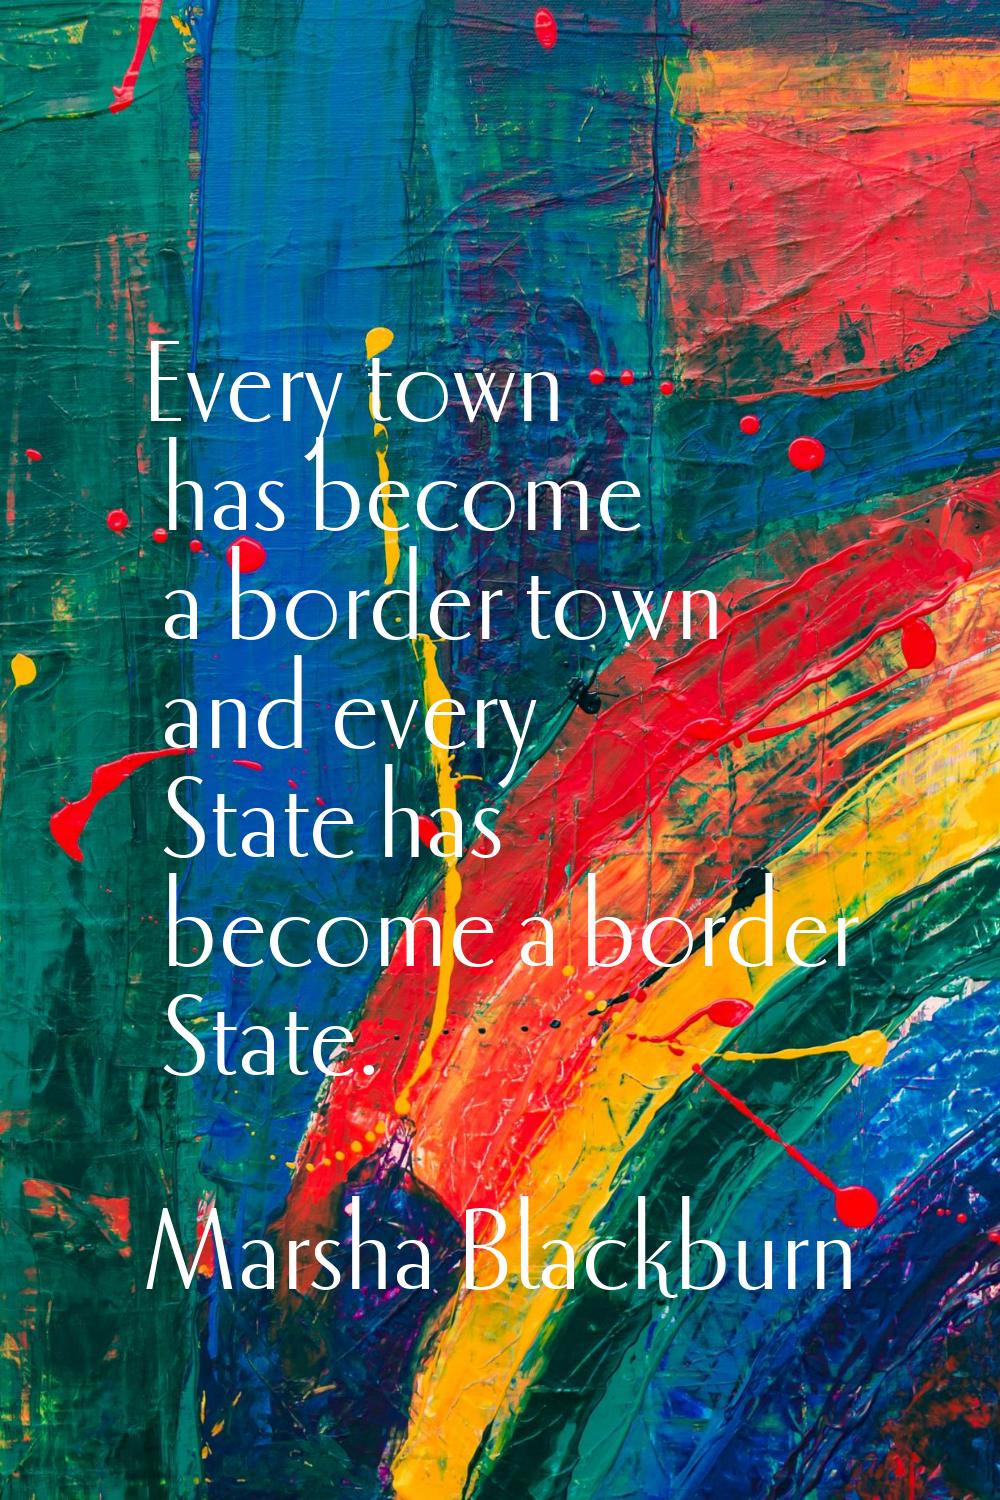 Every town has become a border town and every State has become a border State.